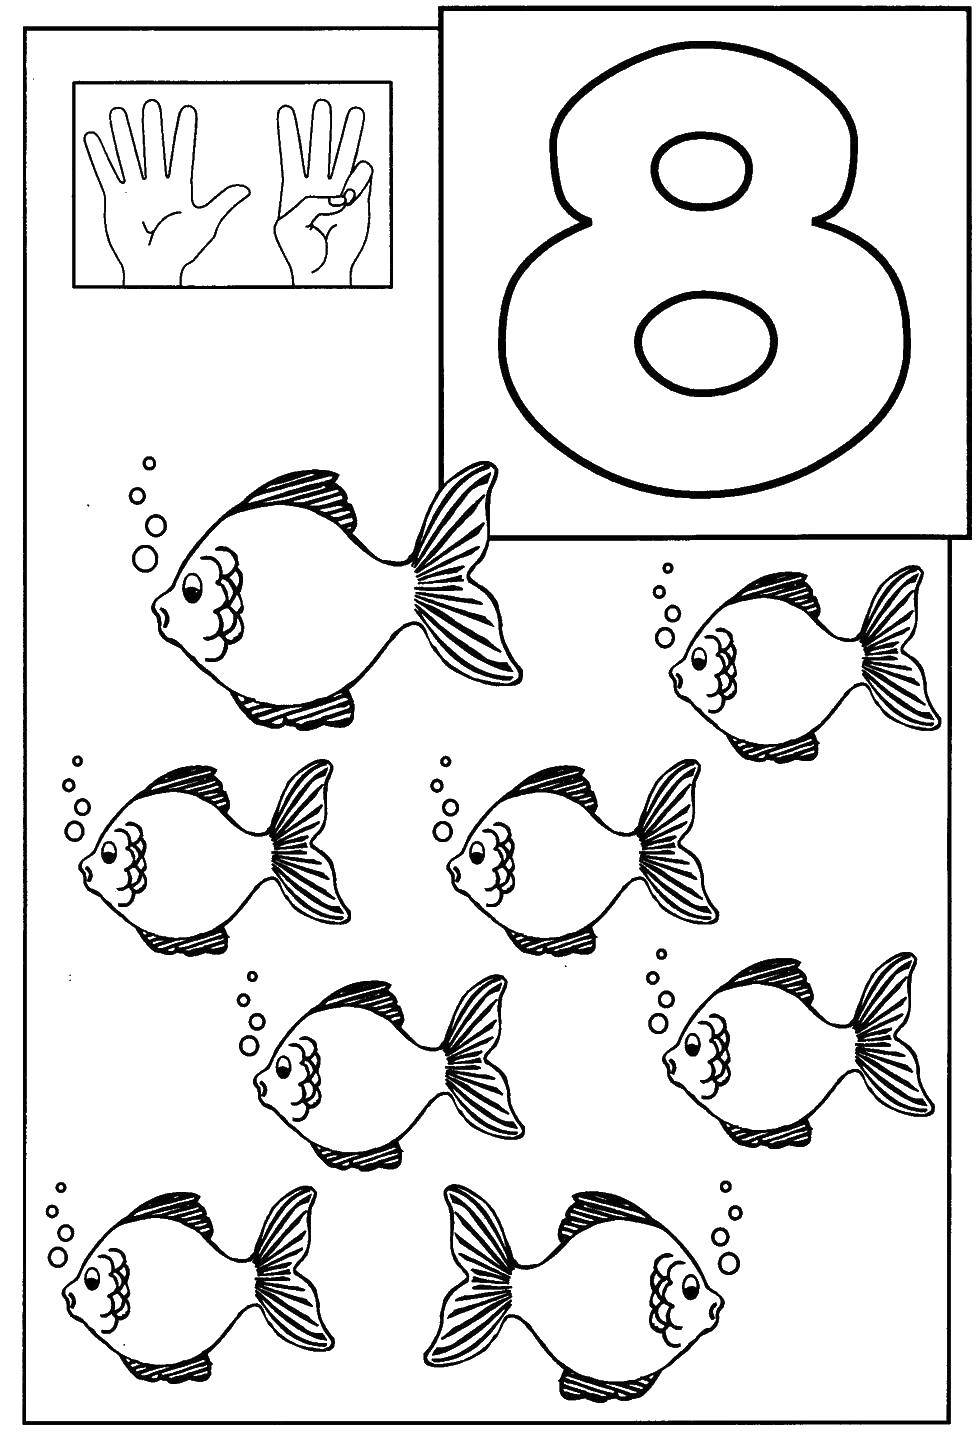 Coloring Fish 8. Category Numbers. Tags:  numbers, counting, fishes, 8.